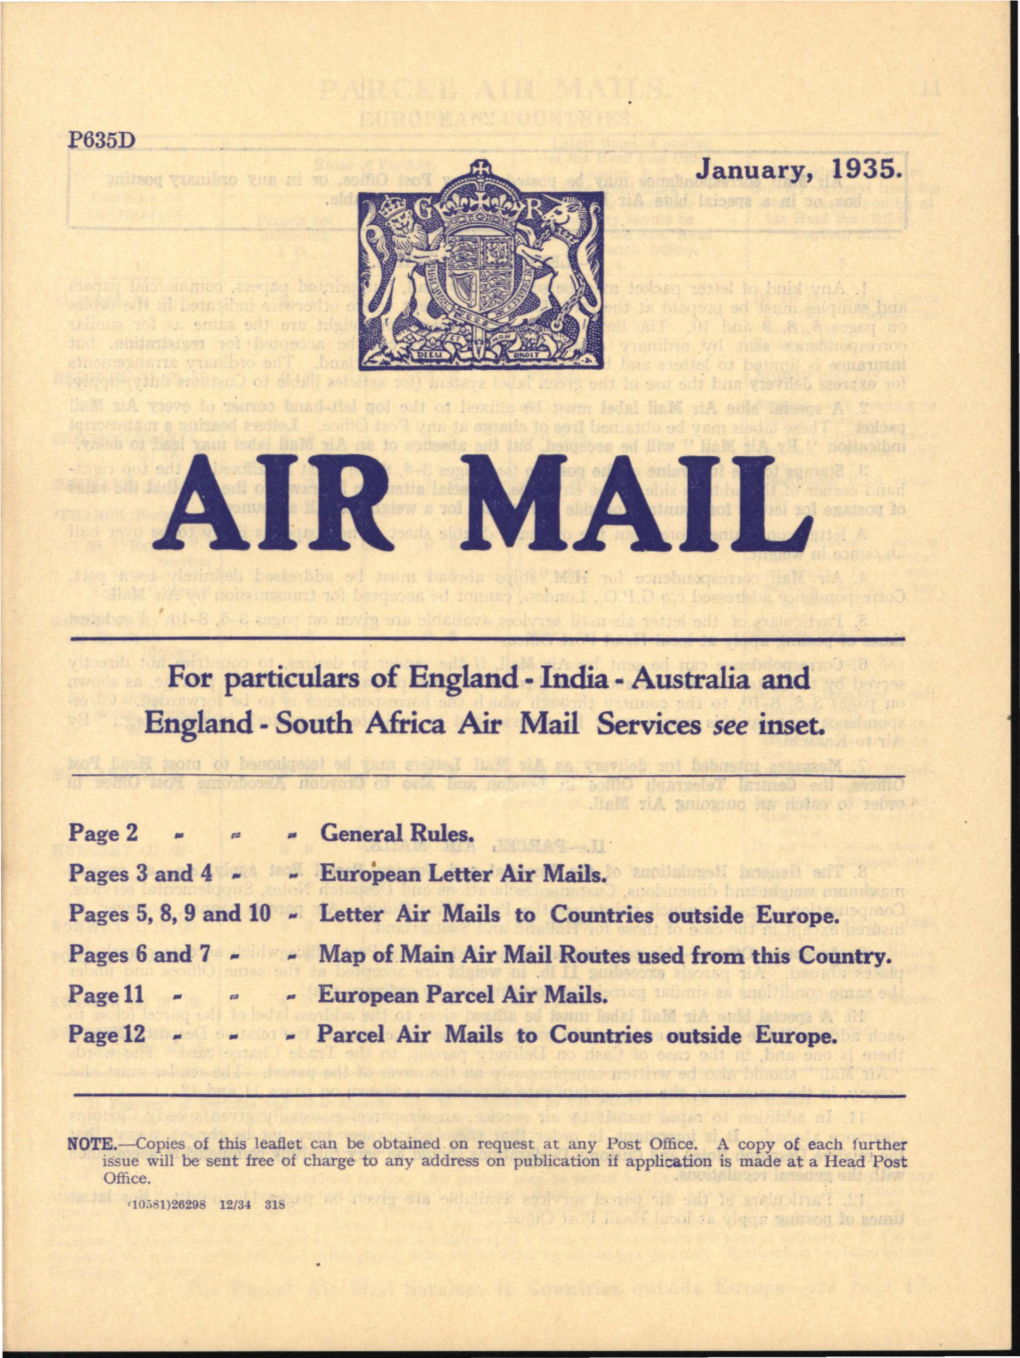 South Africa Air Mail Services See Inset